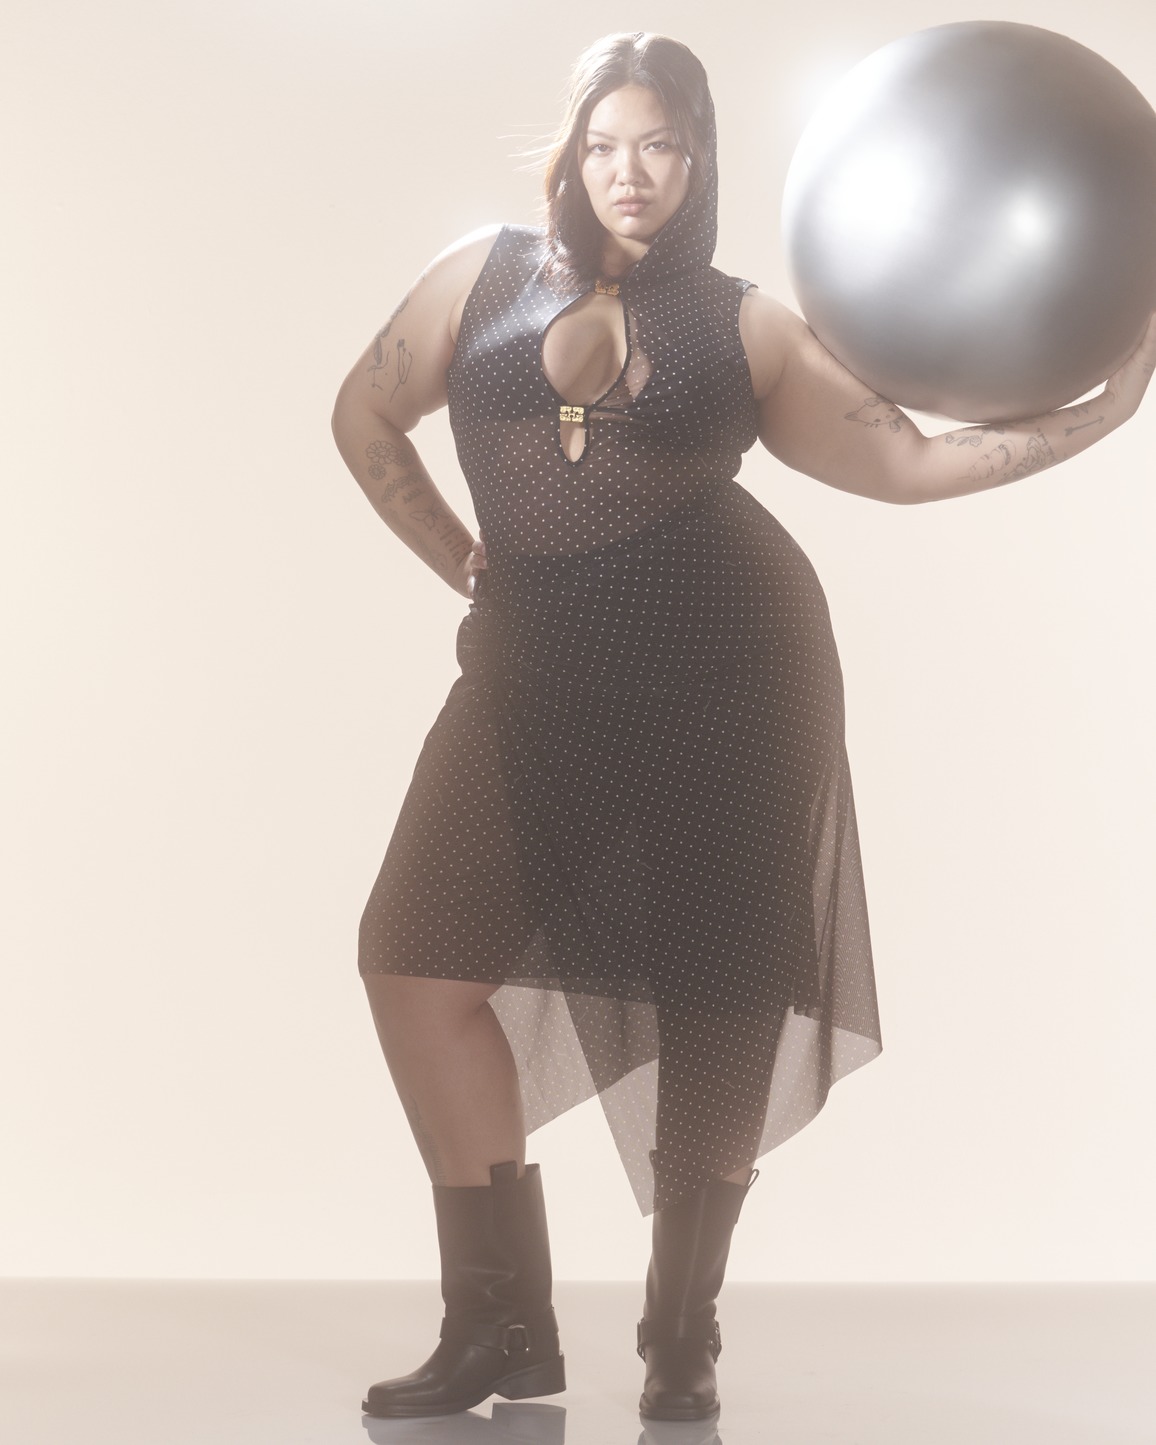 Ganni x Paloma Elsesser Campagin Photography - model holding a silver ball